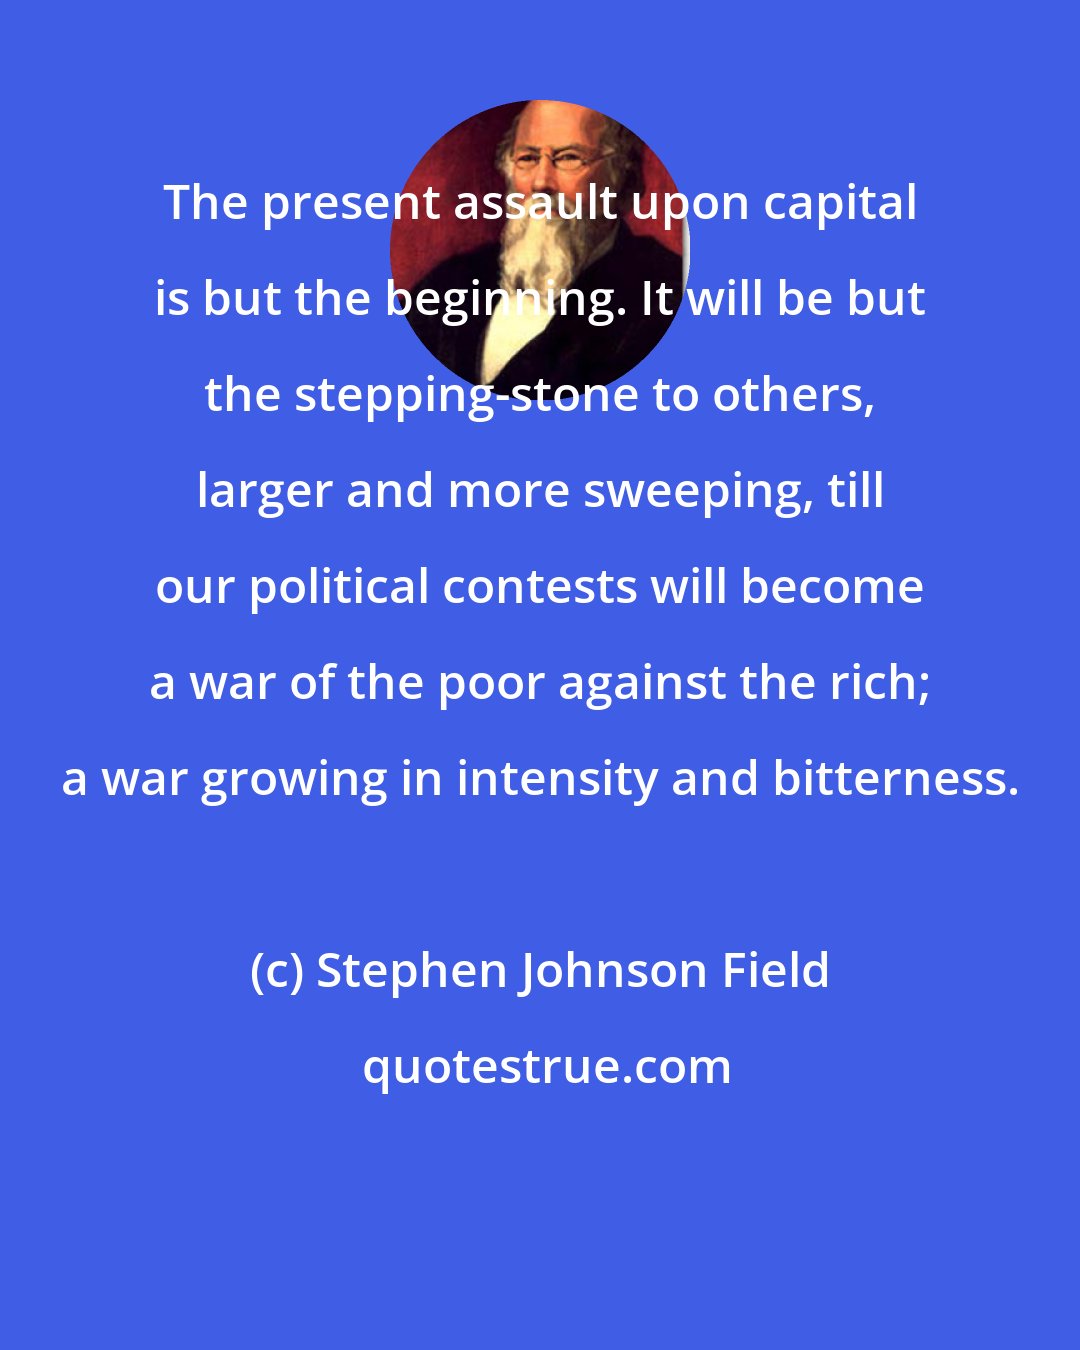 Stephen Johnson Field: The present assault upon capital is but the beginning. It will be but the stepping-stone to others, larger and more sweeping, till our political contests will become a war of the poor against the rich; a war growing in intensity and bitterness.